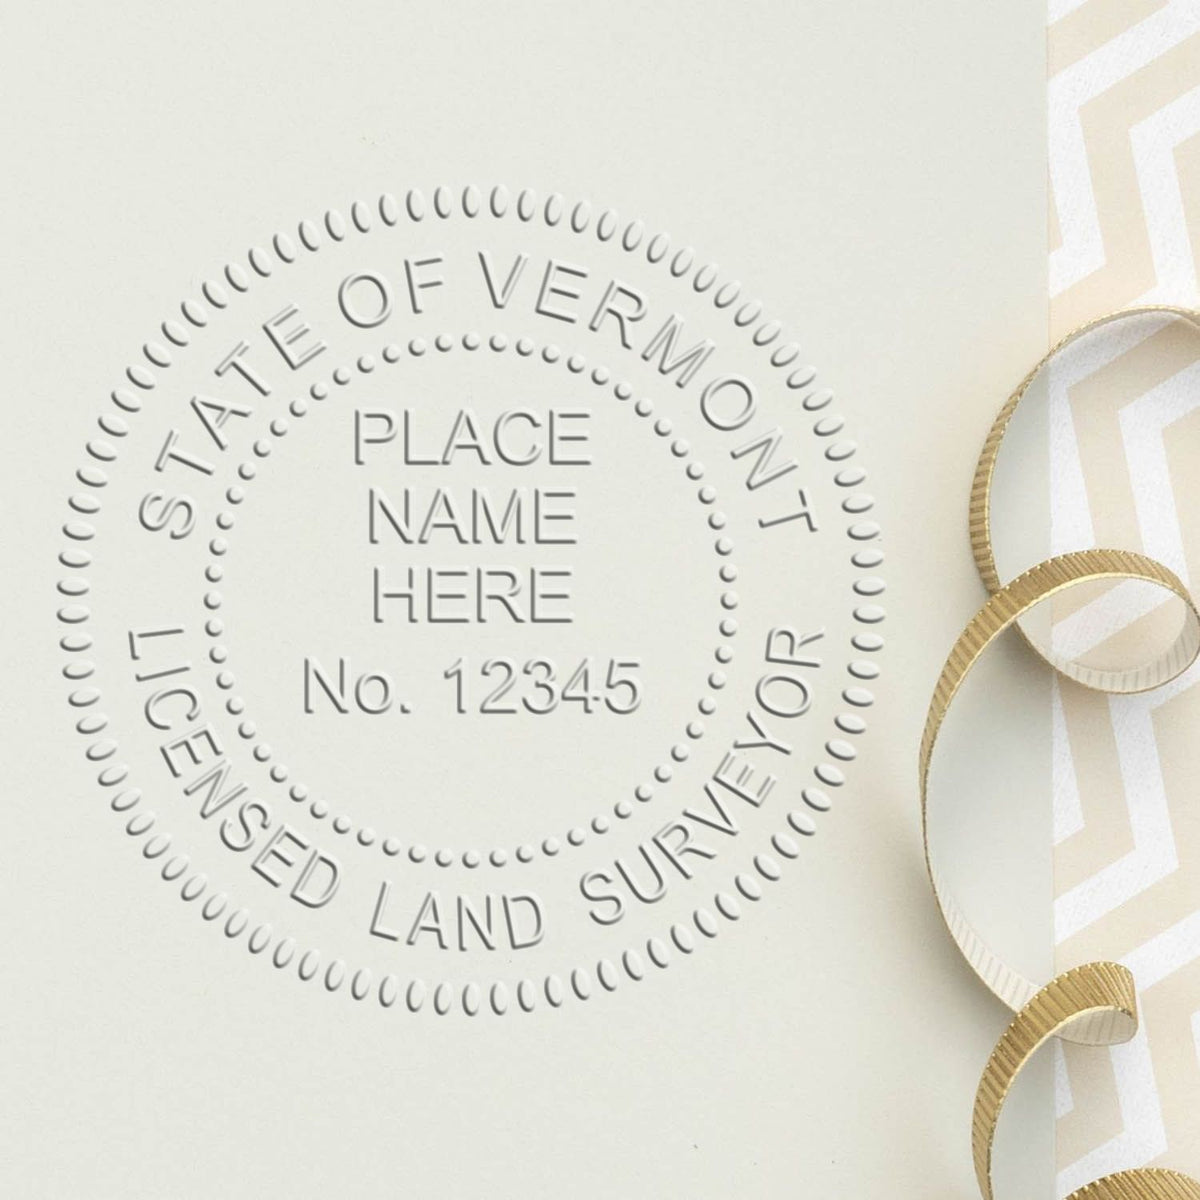 A stamped imprint of the Gift Vermont Land Surveyor Seal in this stylish lifestyle photo, setting the tone for a unique and personalized product.